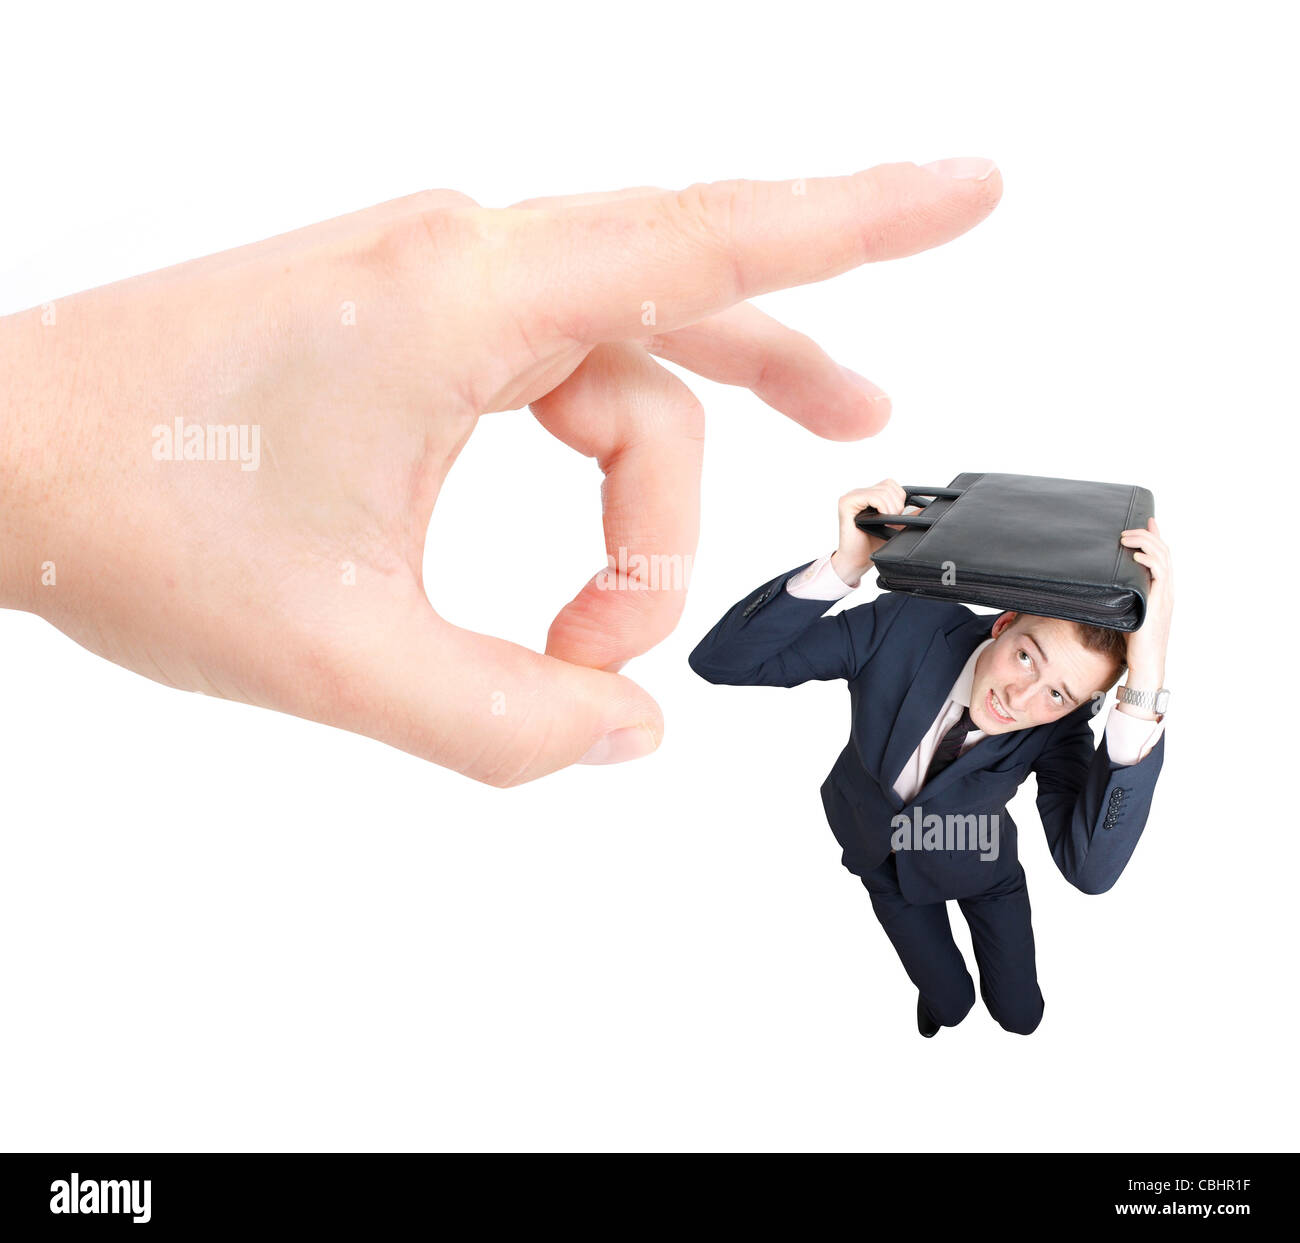 Employee getting fired Stock Photo